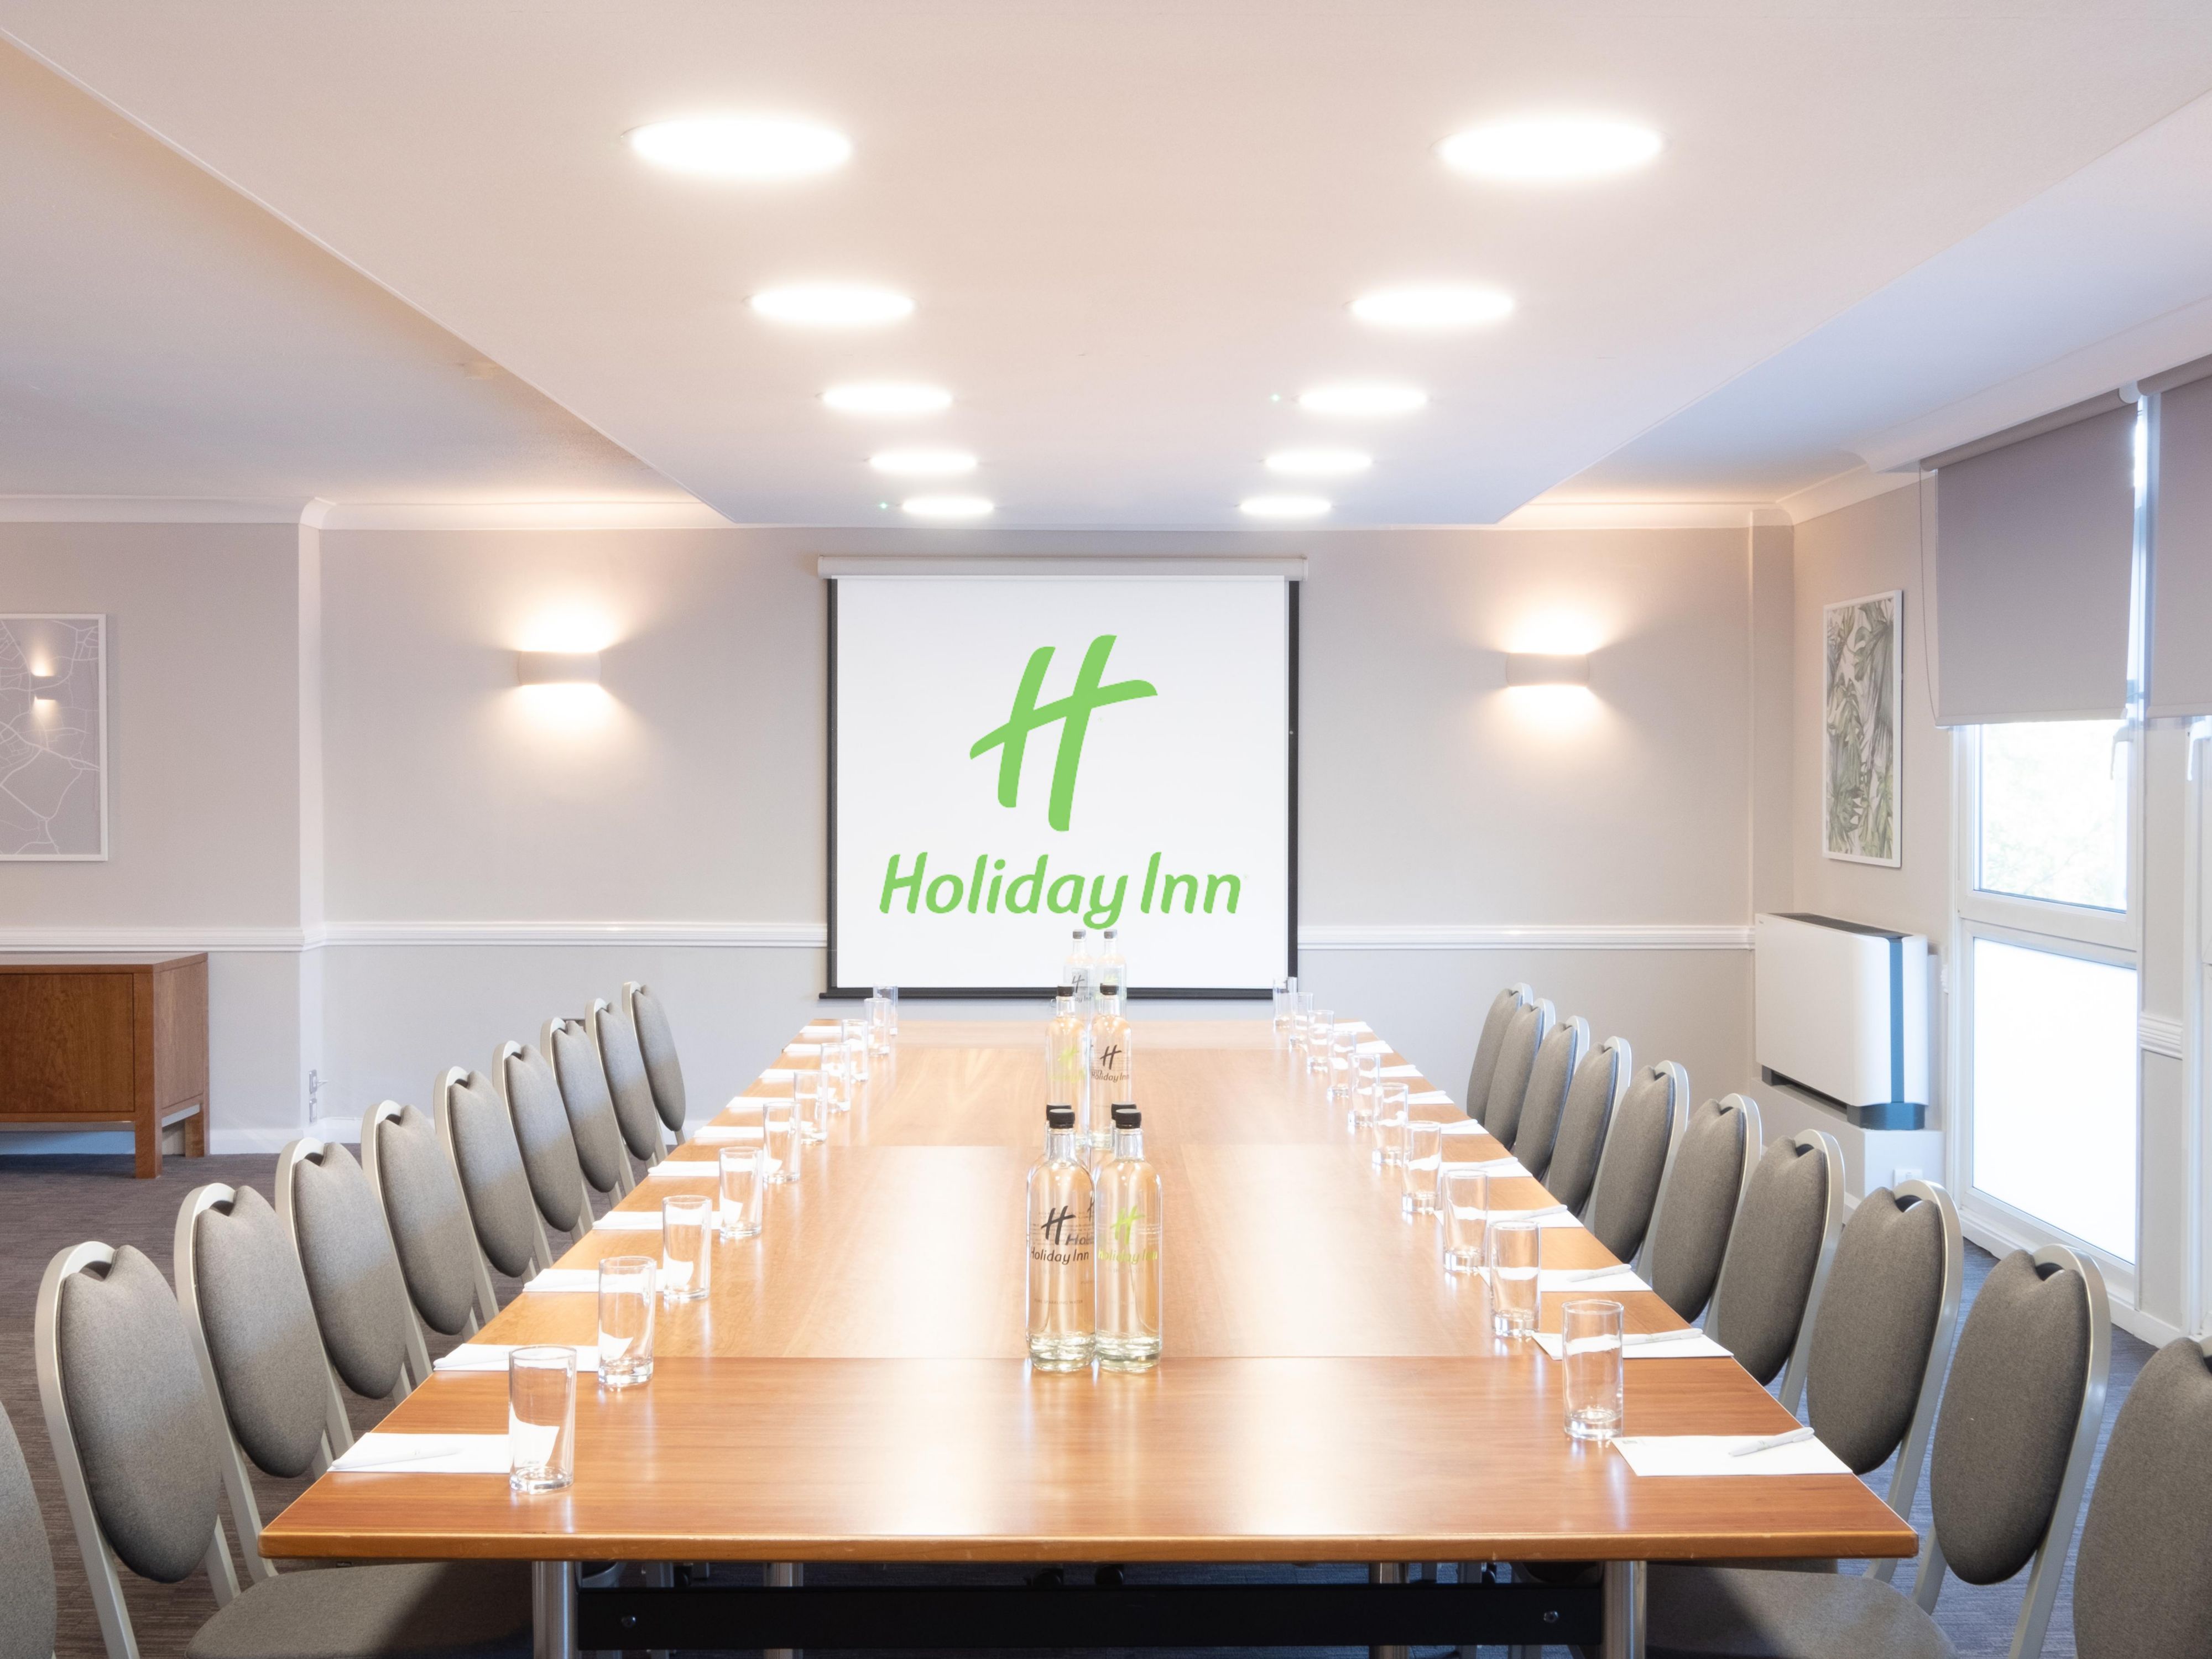 Choose from the hotel’s eight extensive meeting spaces, ranging from boardrooms to a flexible event suite, to host functions for up to 300 people. AV equipment and free standard Wi-Fi help presentations run smoothly. Delicious menus can be created to really wow your delegates and guests. 